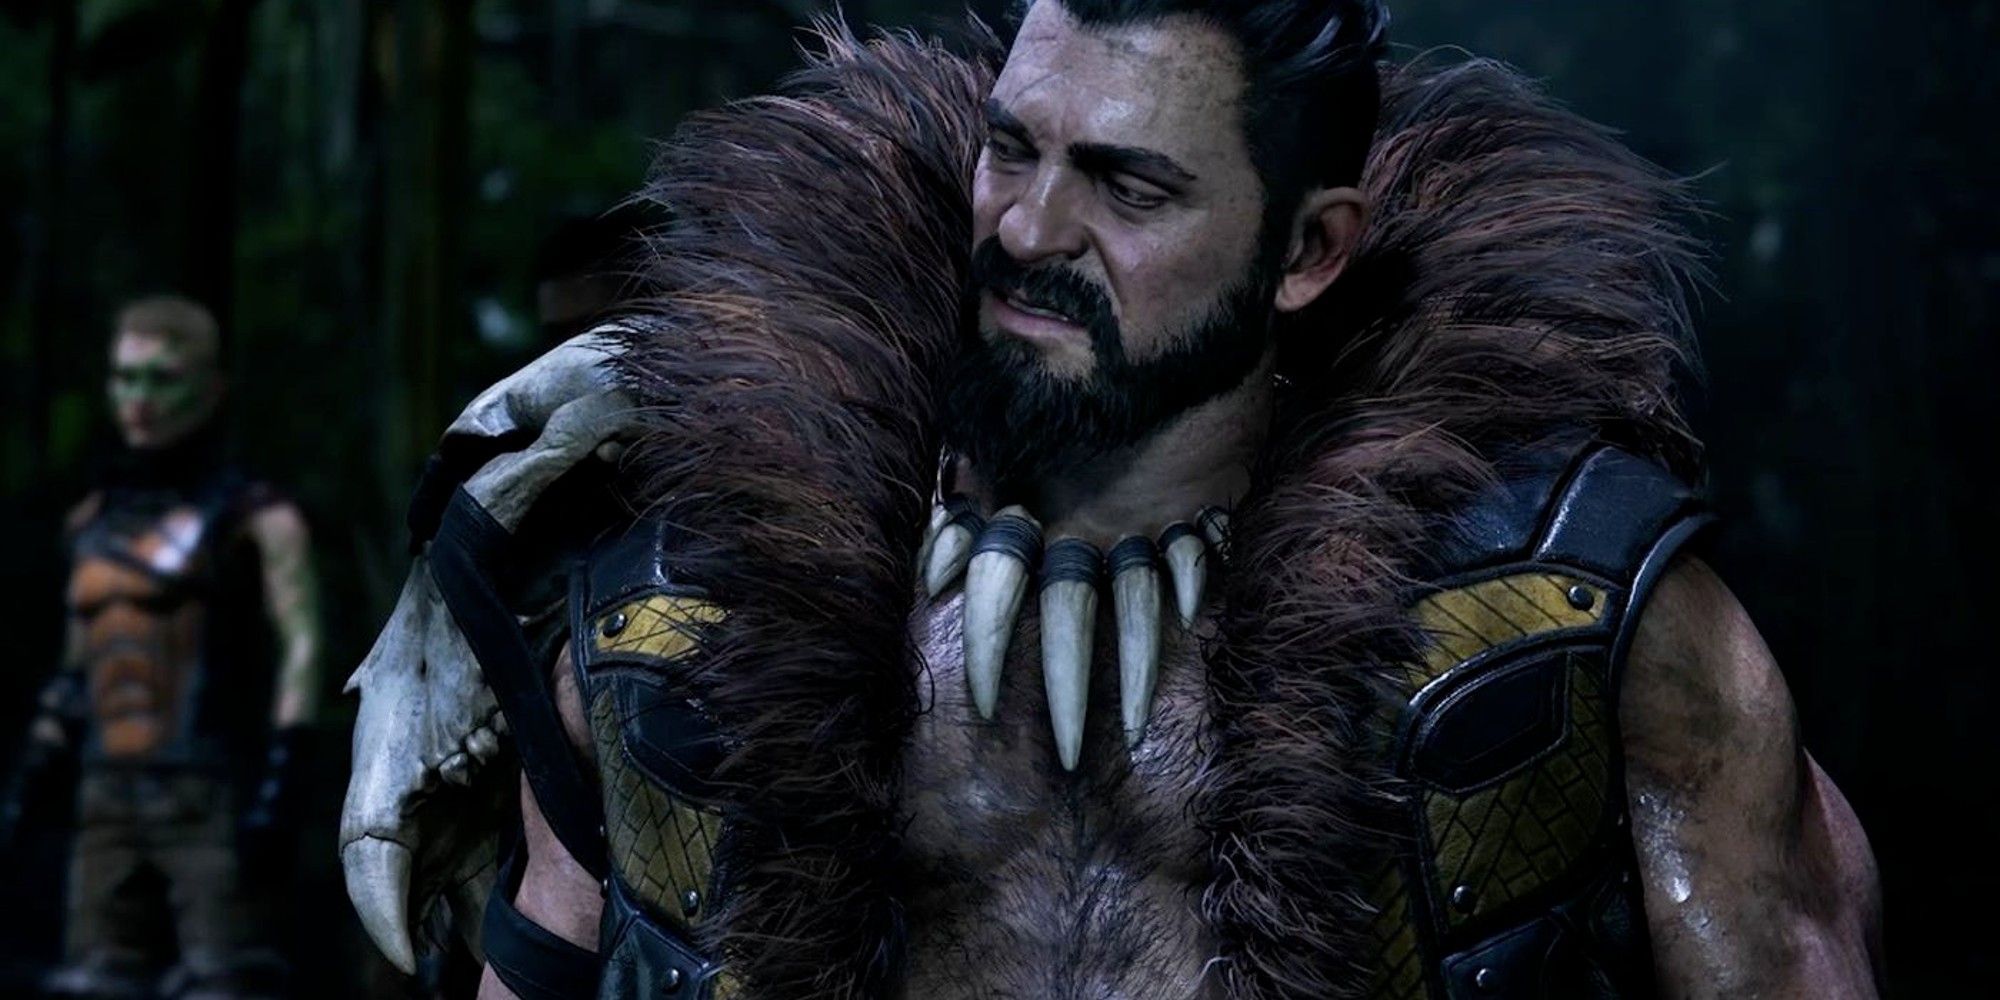 Kraven with his hunters